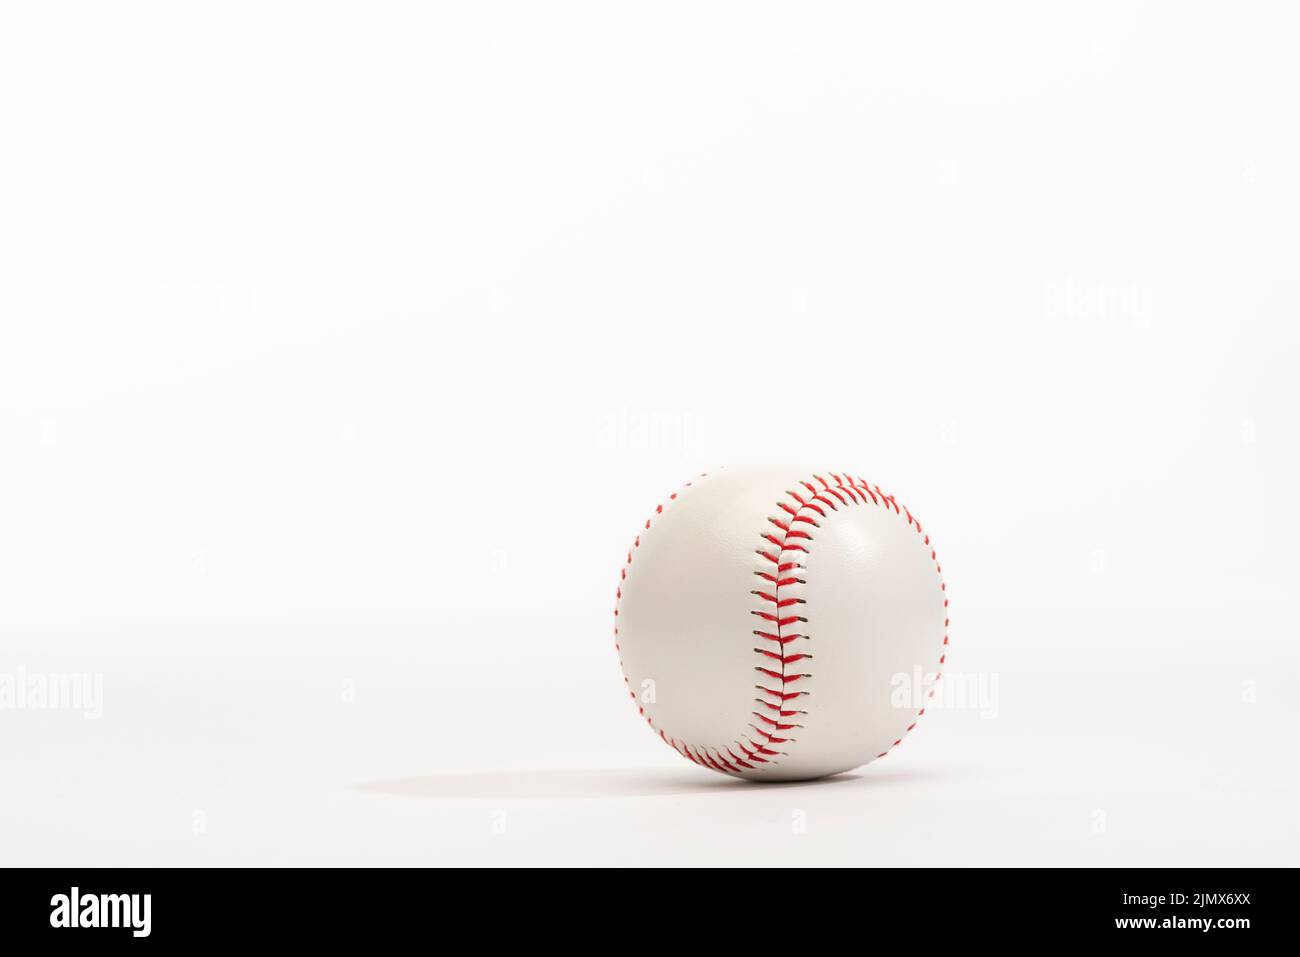 Front view baseball with copy space Stock Photo